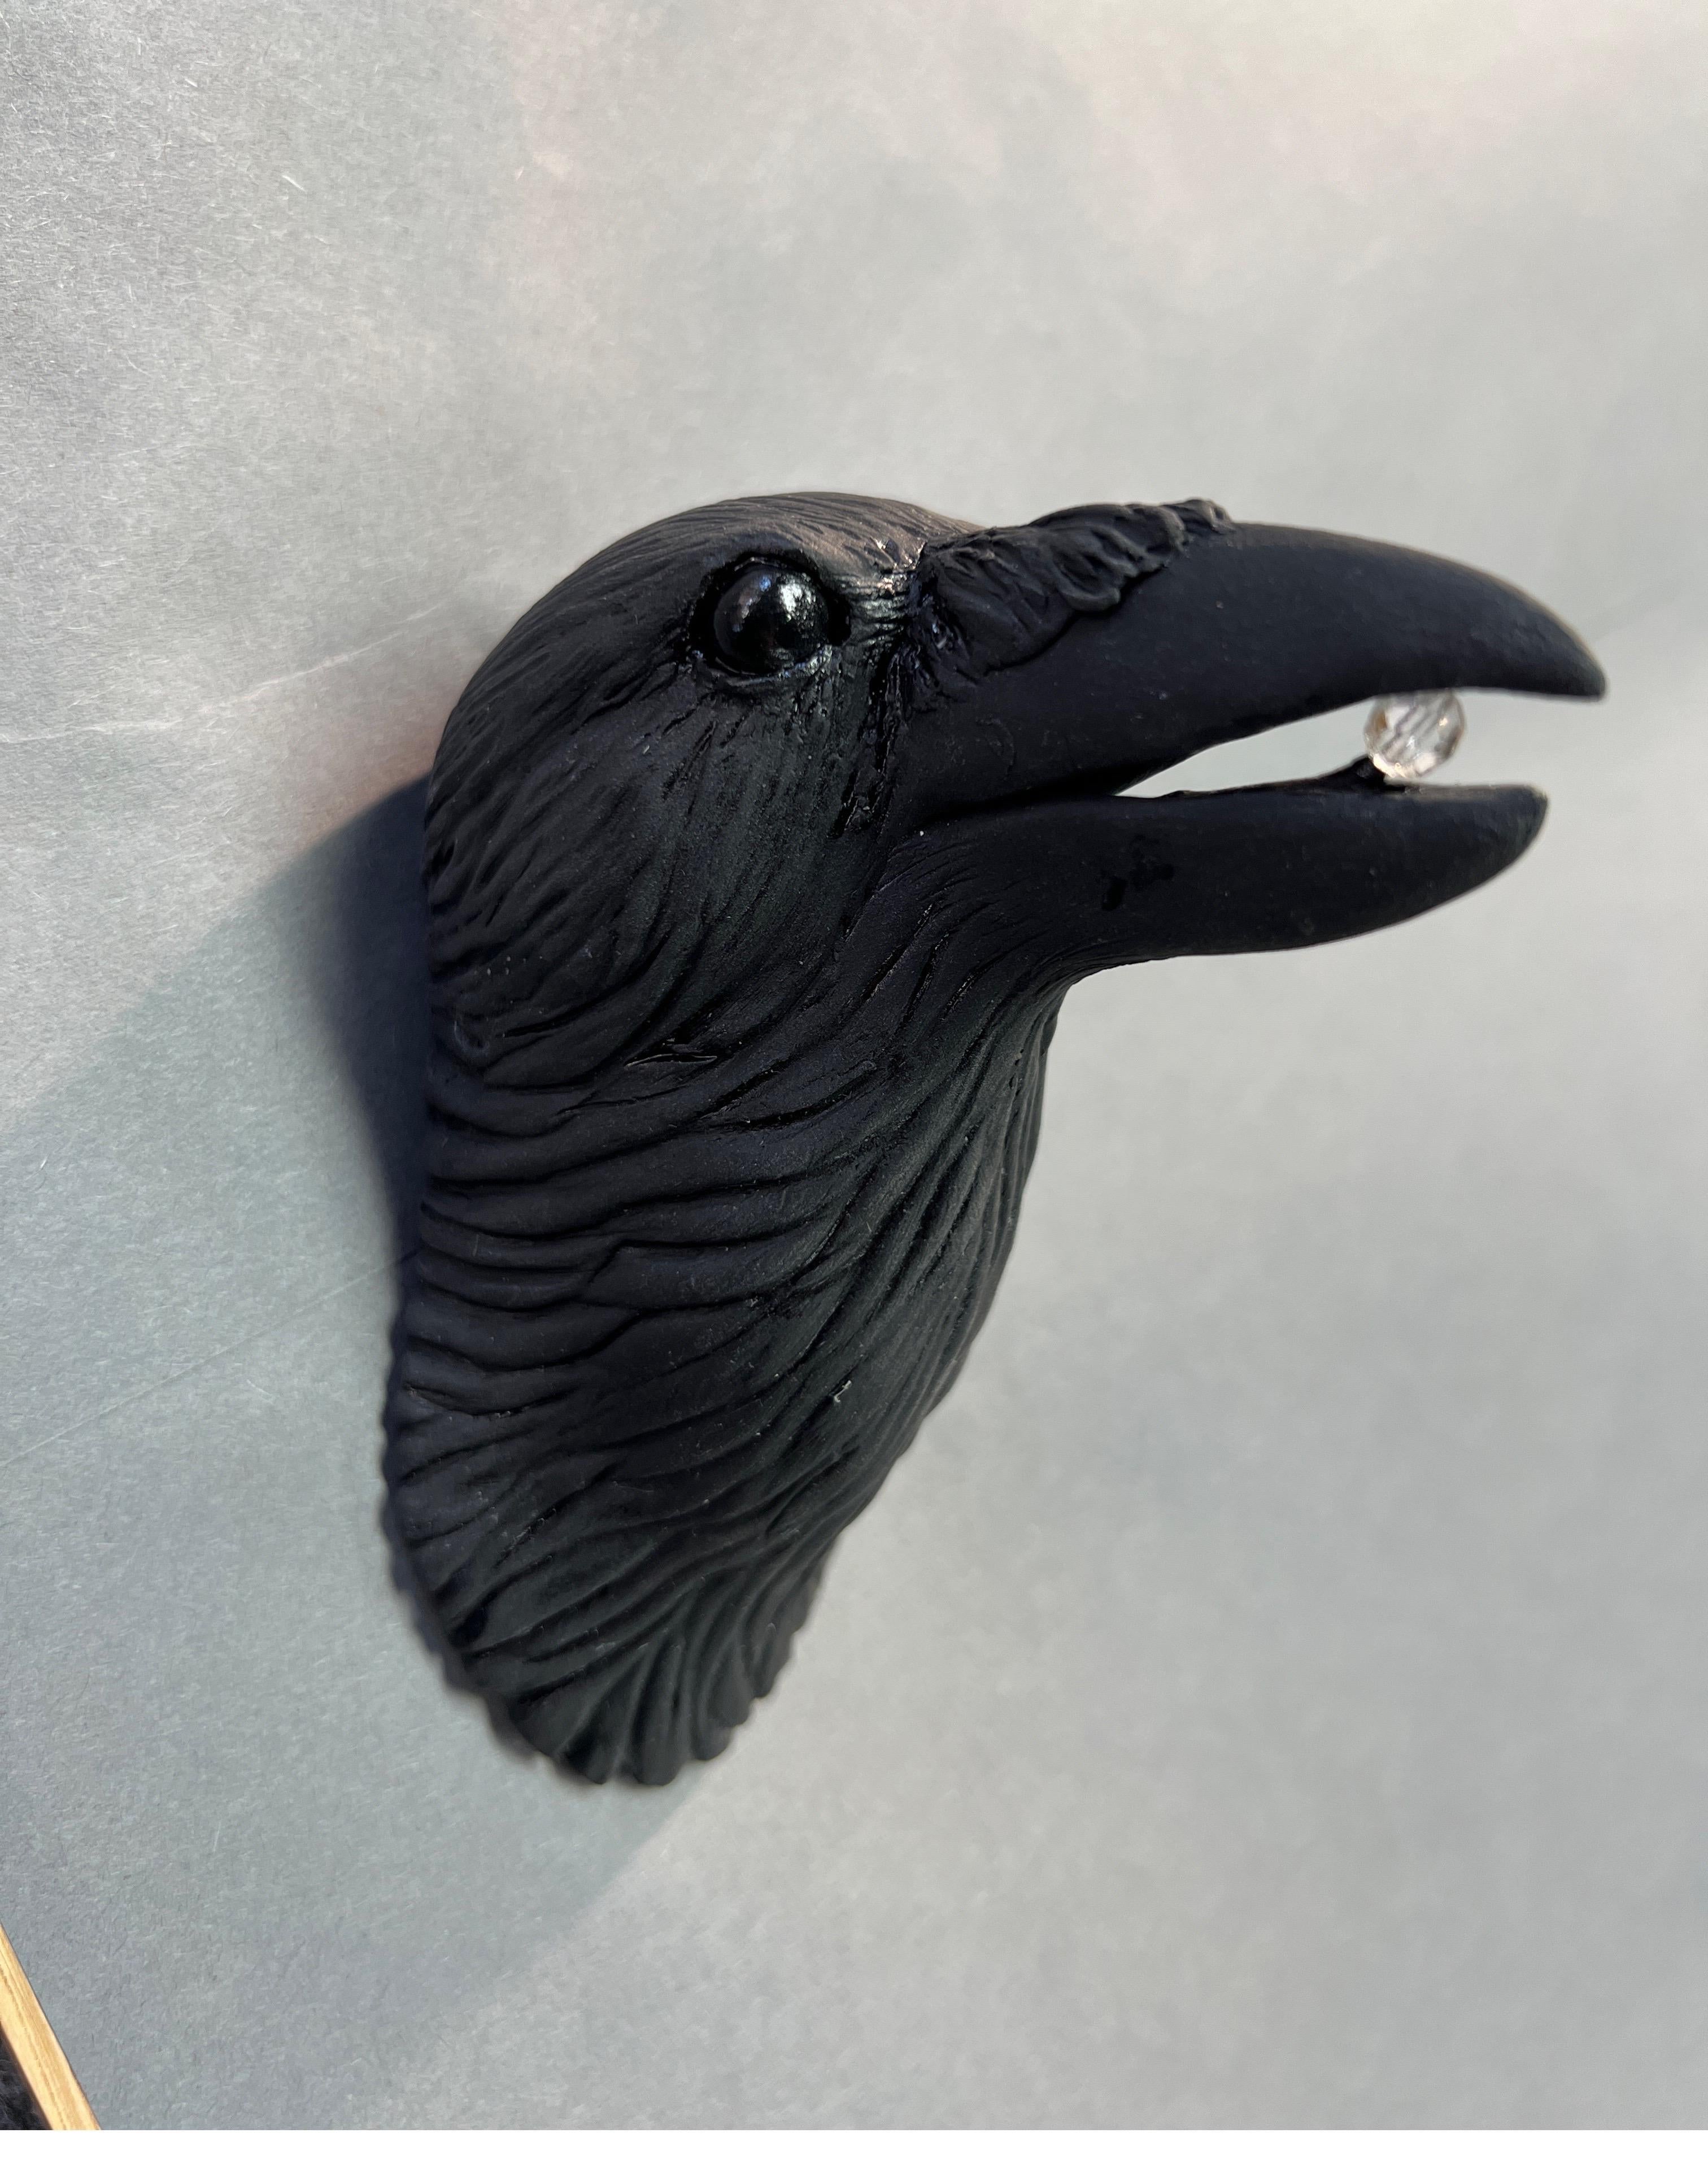 Cv upon request
Karla Walter is an American artist who explores similarities between the social interactions among crows and that of individuals in our society.
Karla Walter went to school later in life and received her Bachelor’s in Fine Arts,